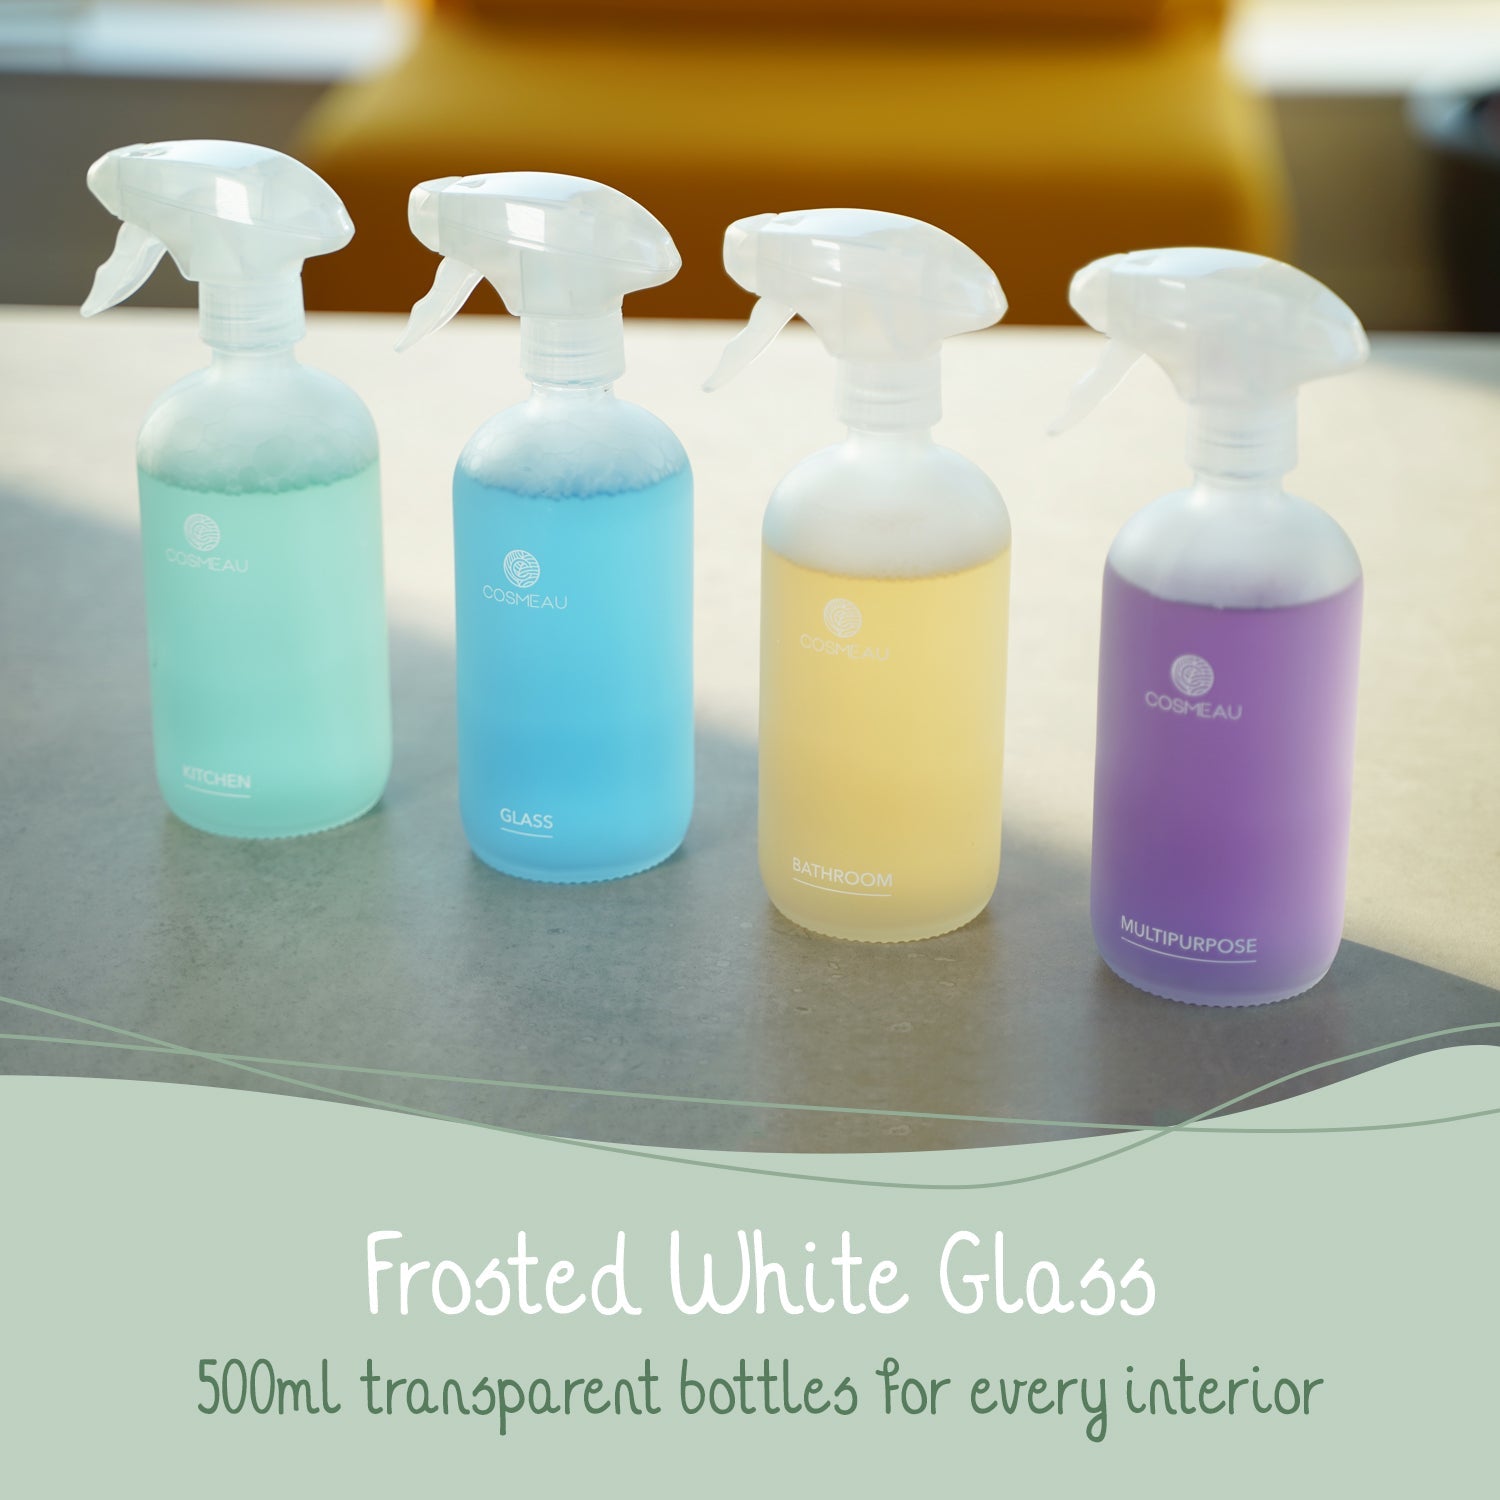 Cosmeau Bathroom Spray Bottle Frosted White